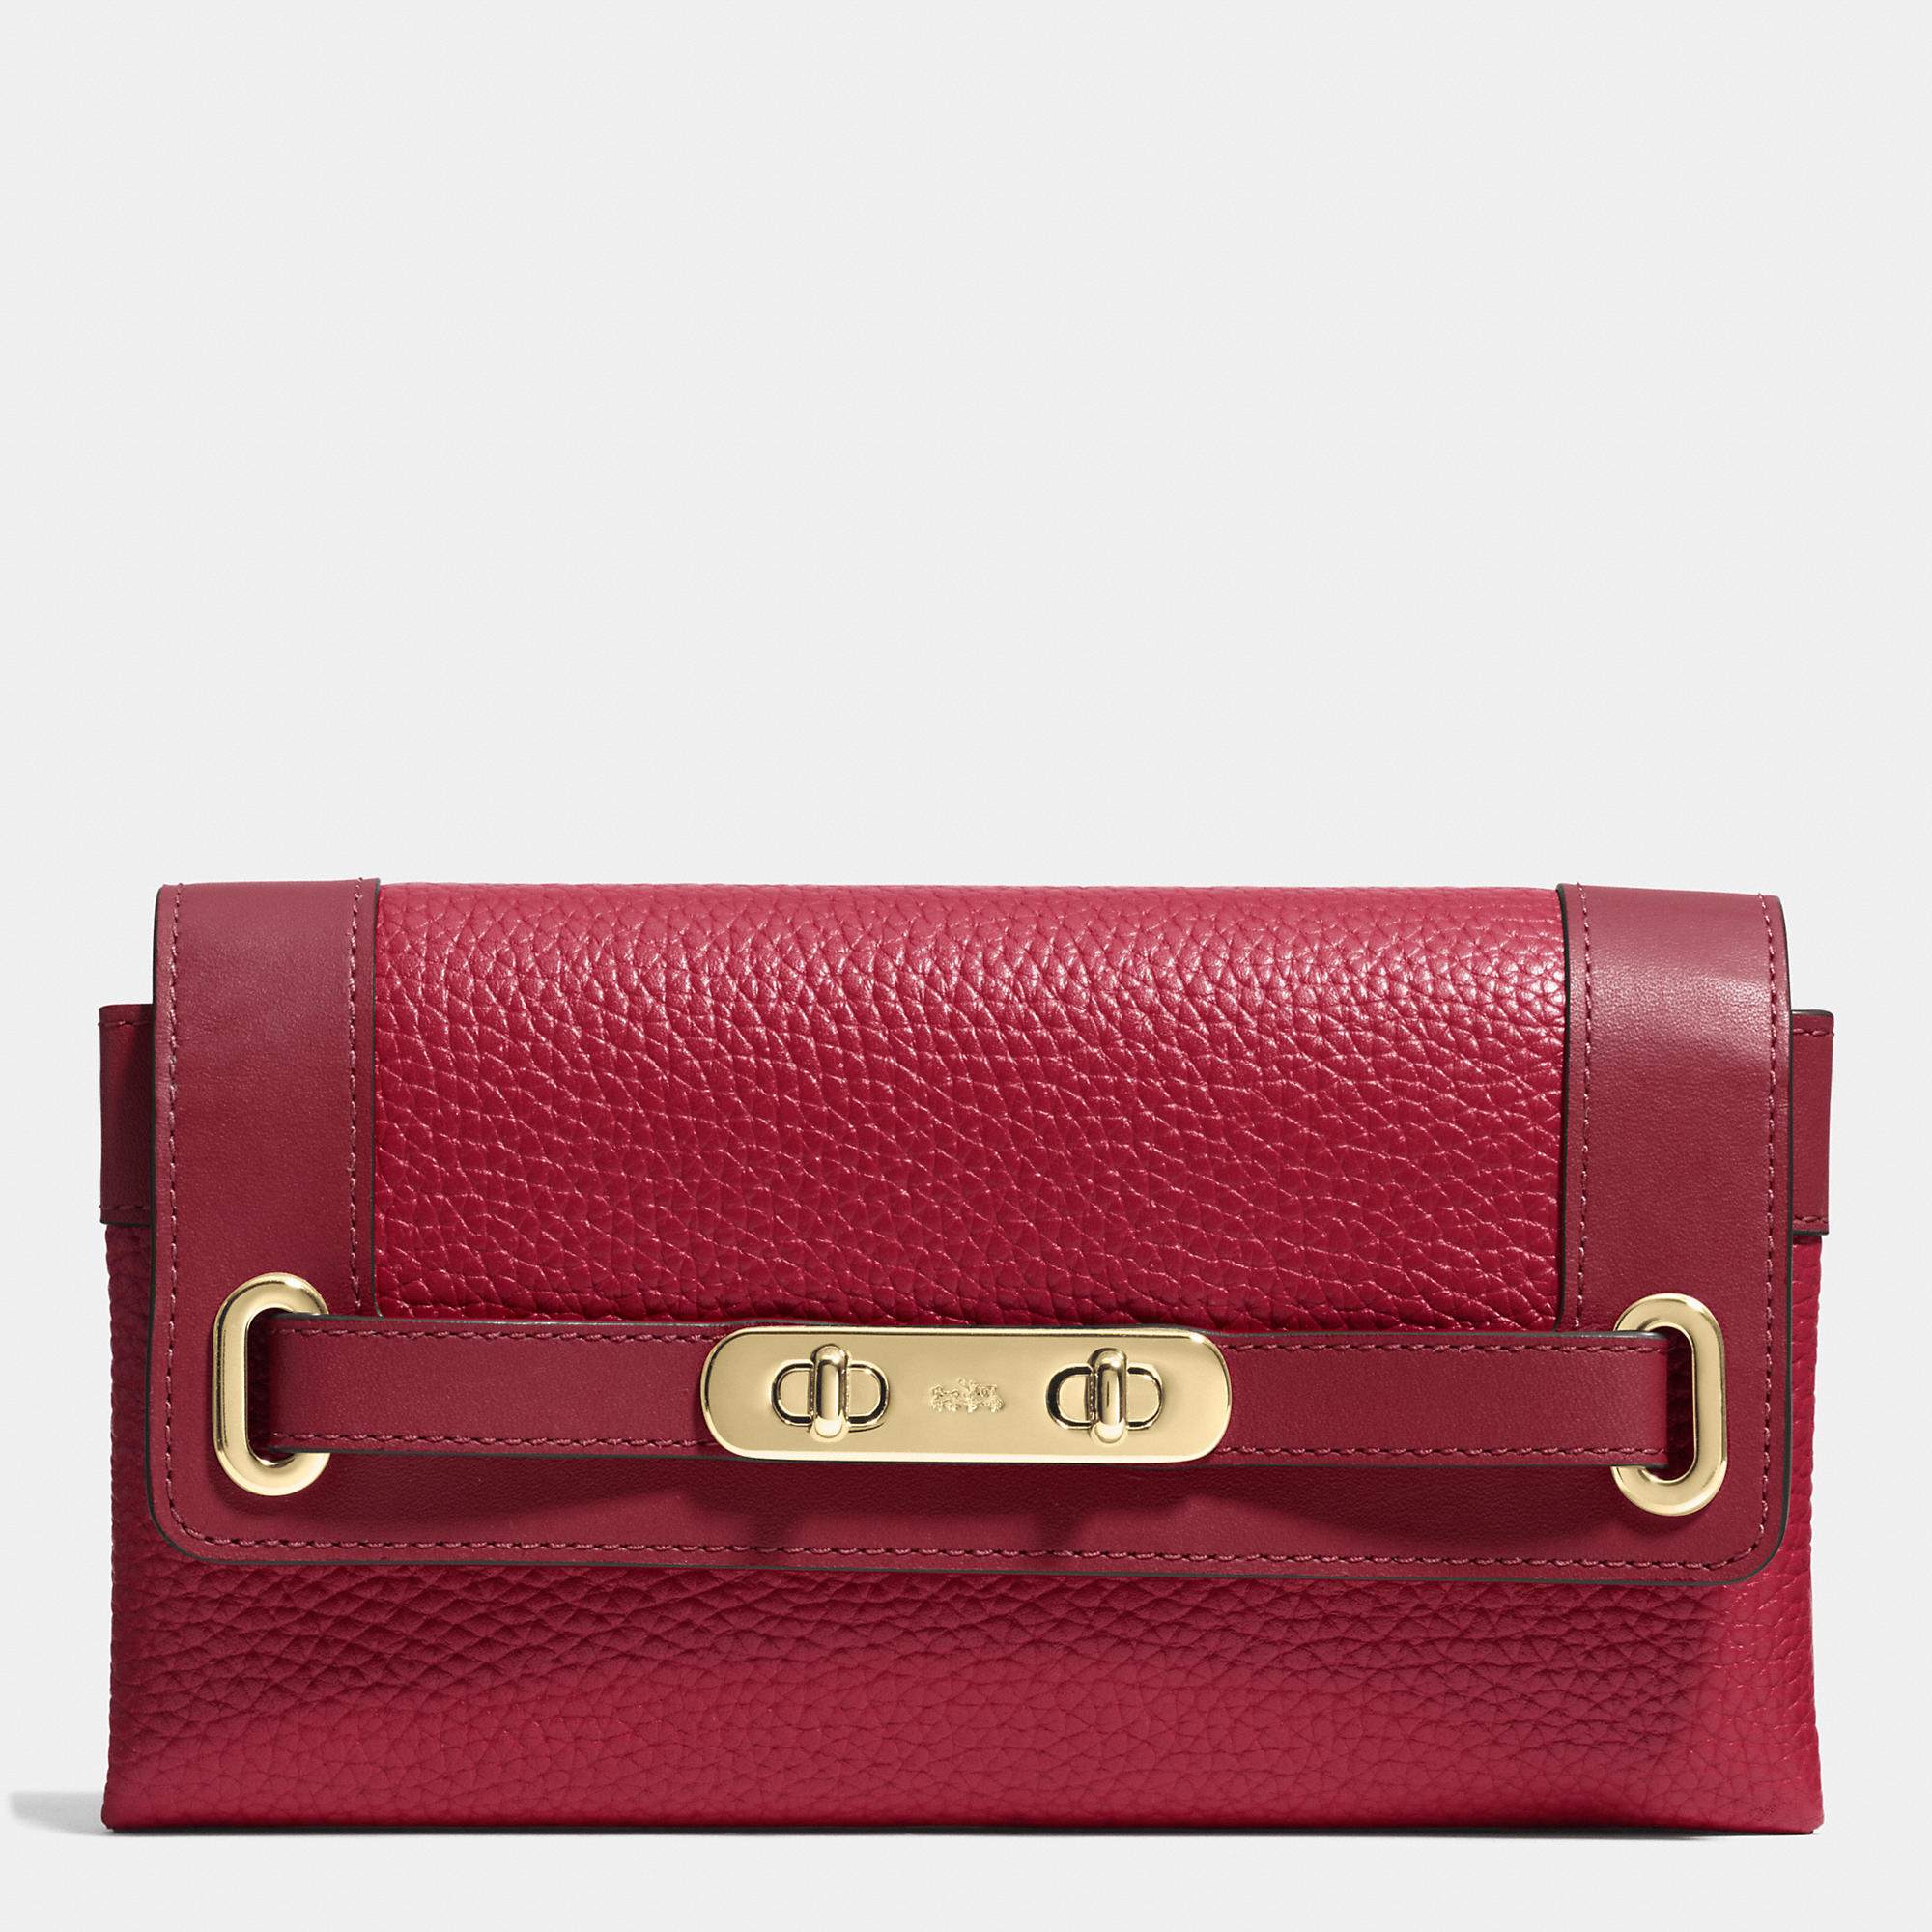 Coach Swagger Wallet In Pebble Leather in Red (LIGHT GOLD/BLACK CHERRY)